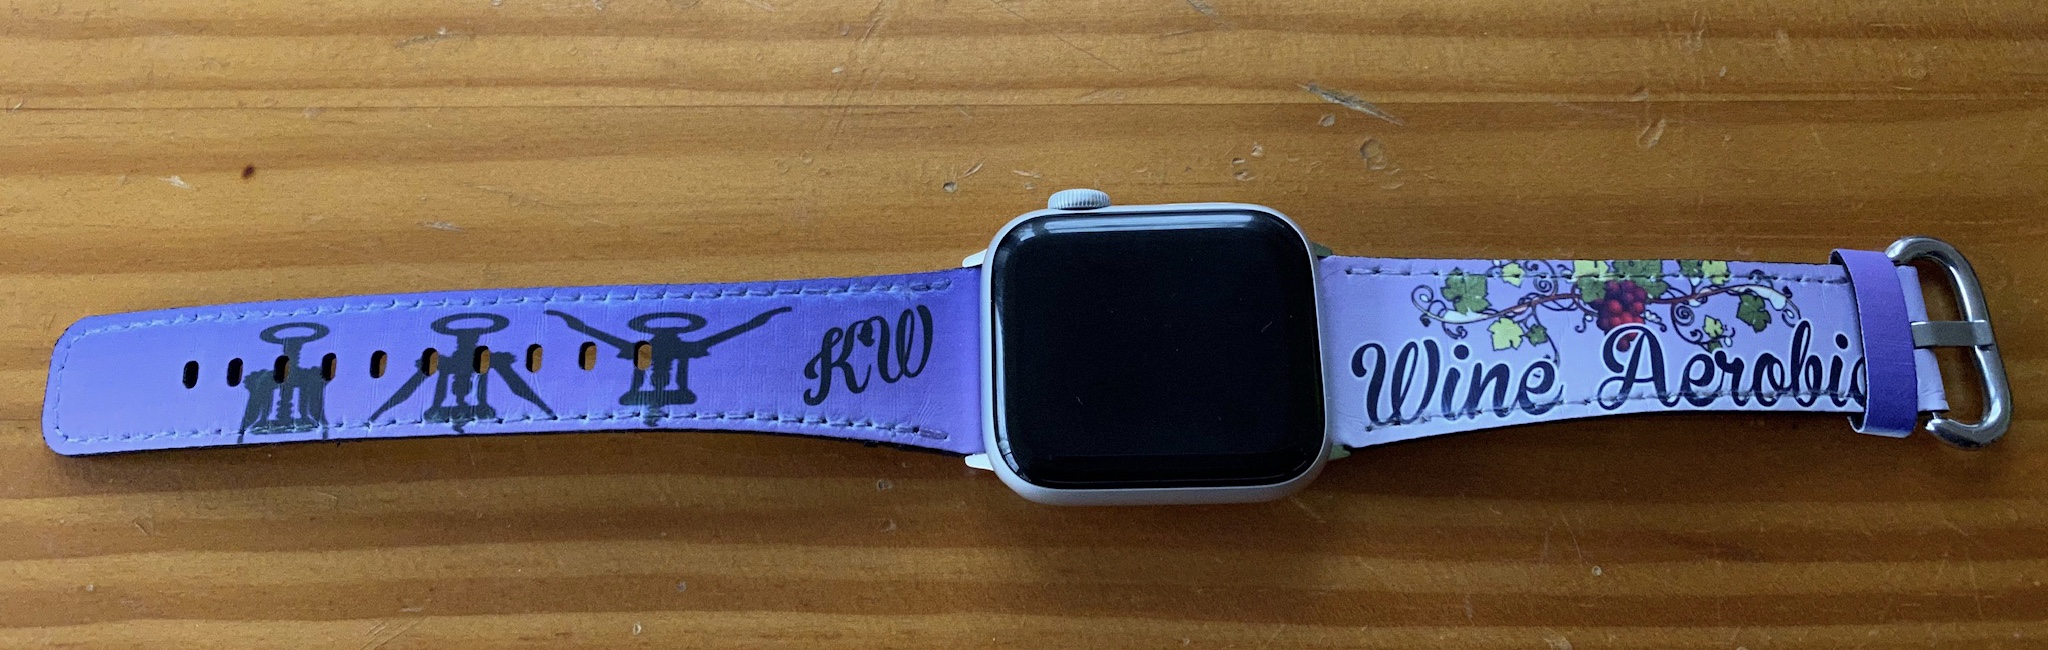 Watchband for Apple watch